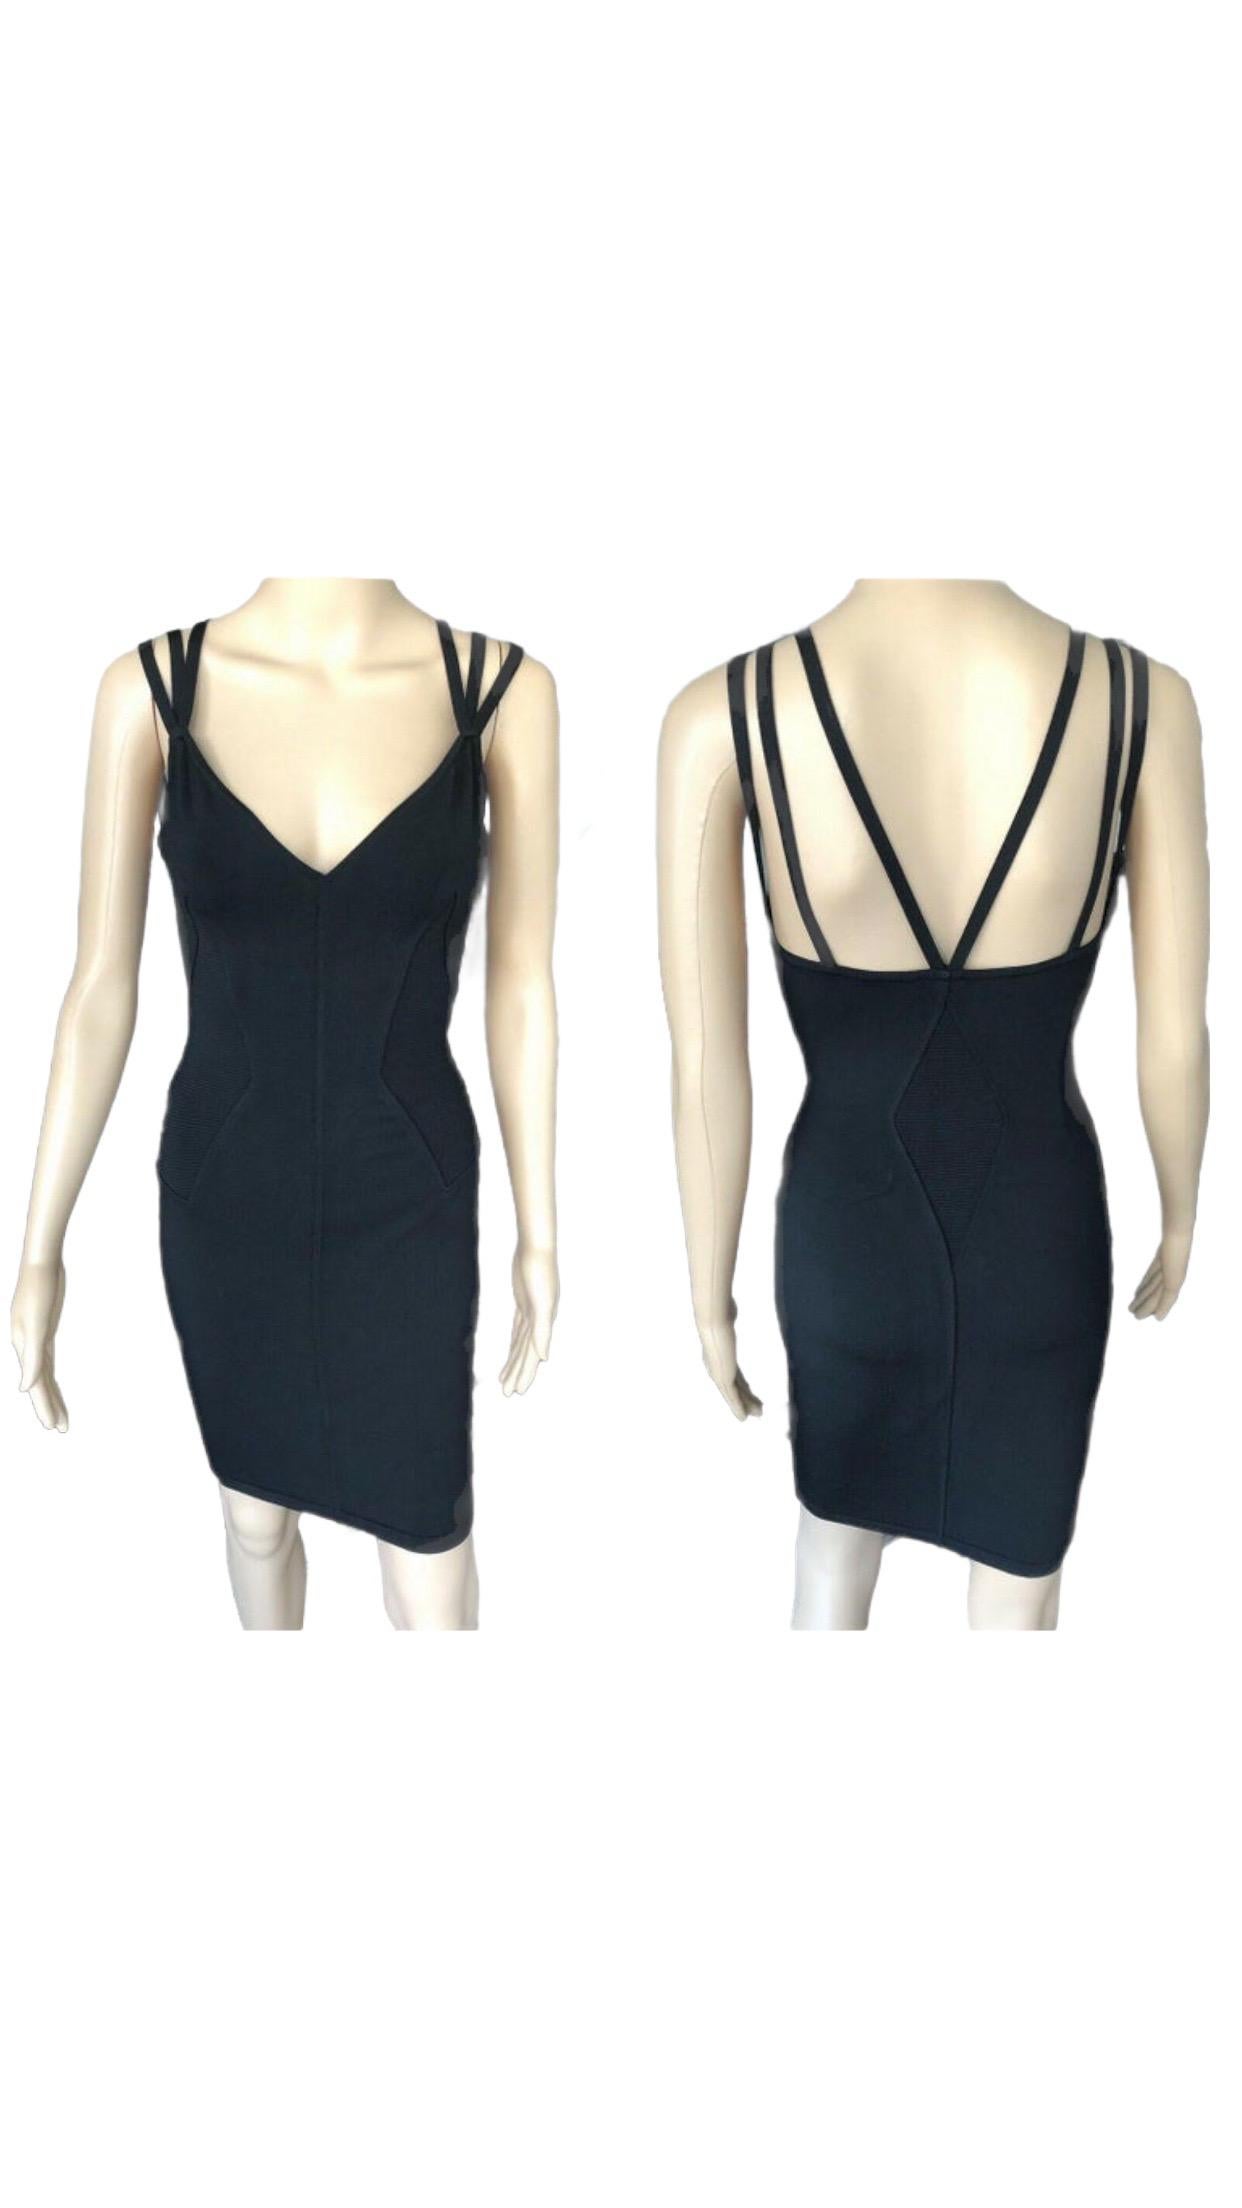 Women's Azzedine Alaia S/S 1990 Vintage Black Bustier Fitted Dress  For Sale